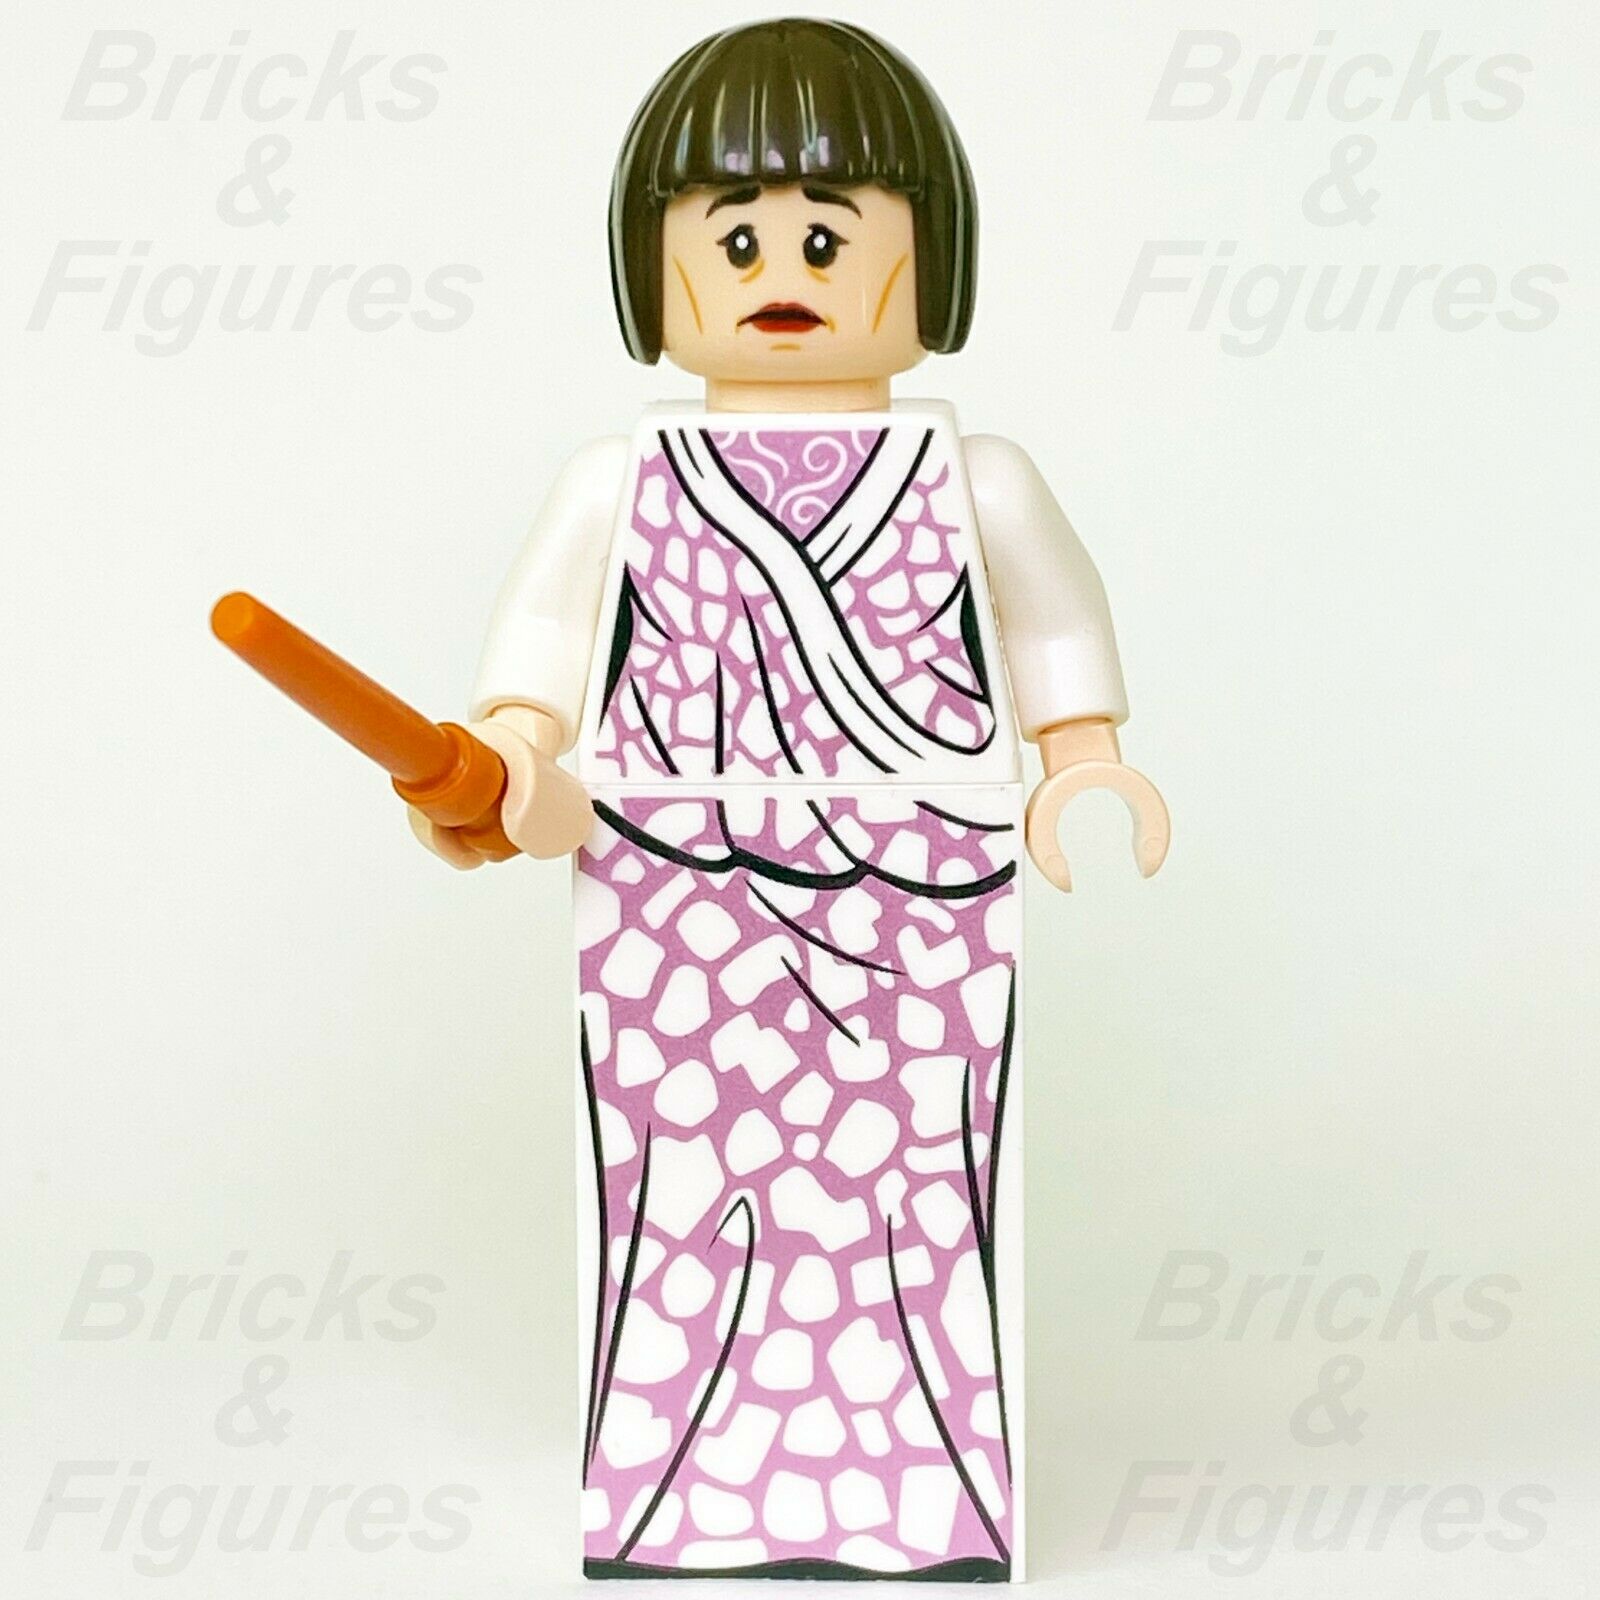 Harry Potter LEGO Madame Olympe Maxime Goblet of Fire Witch Minifig 75948 - Bricks & Figures